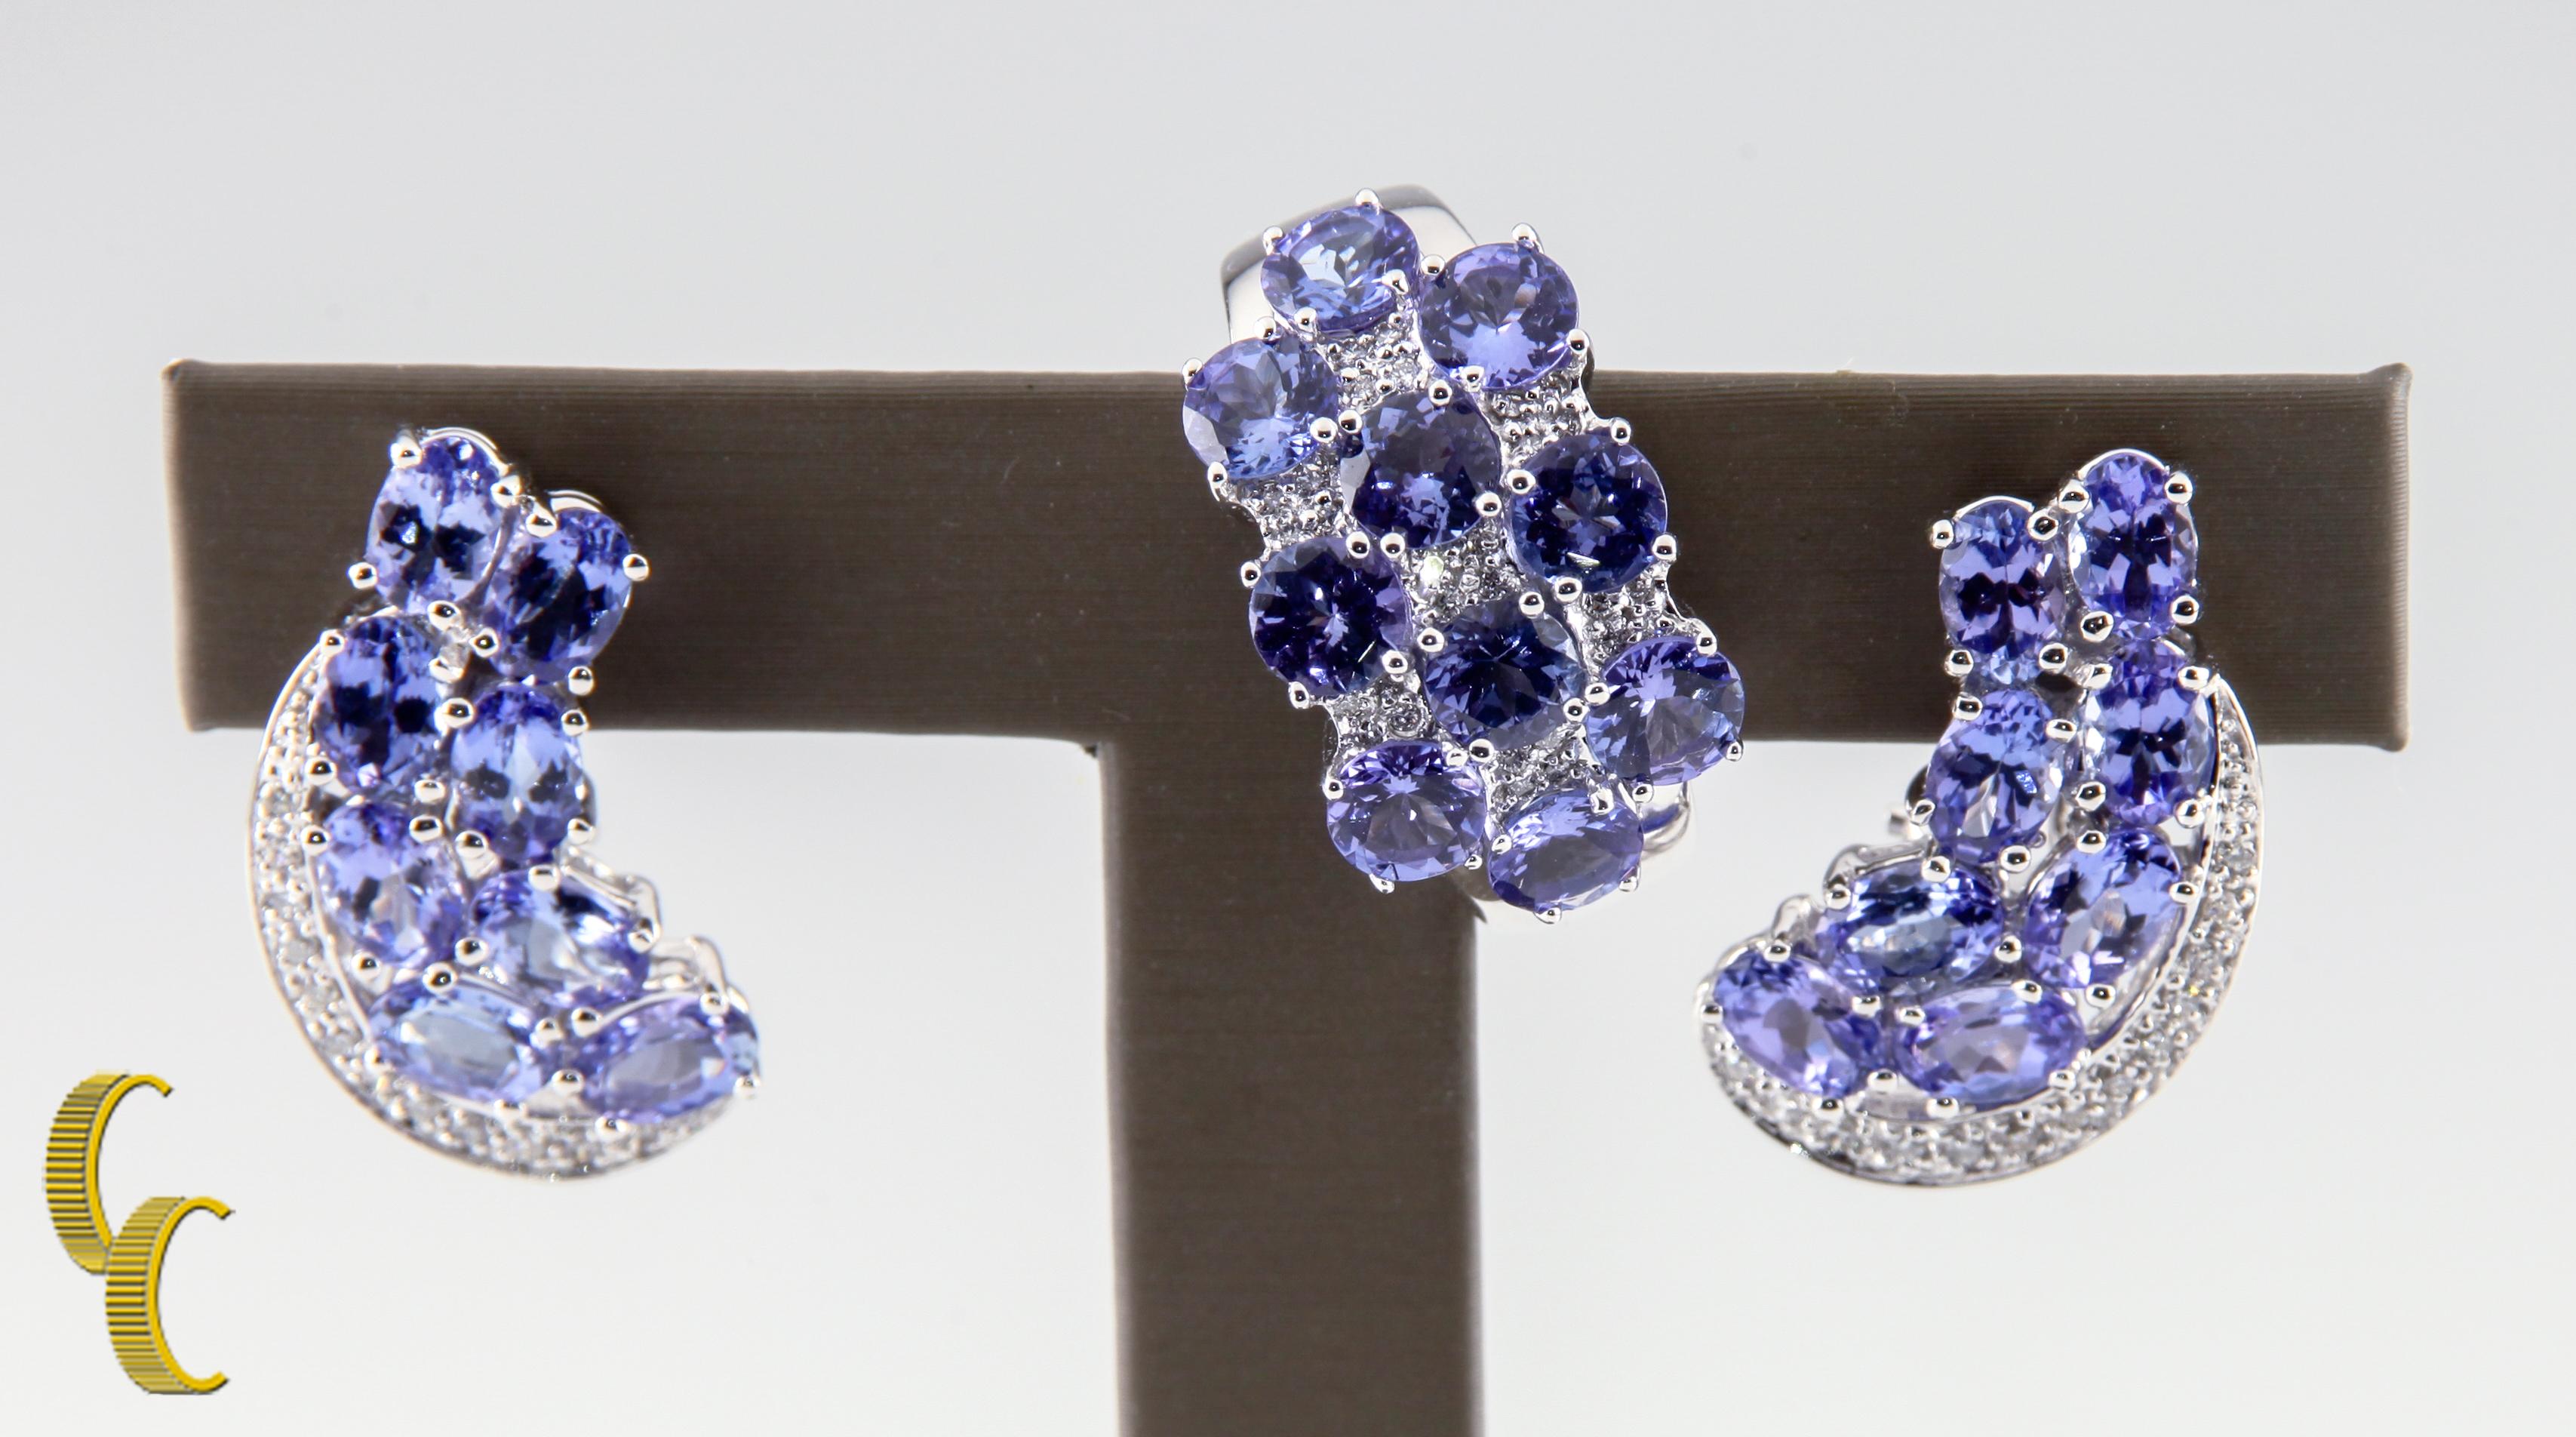 10.60 Carat Iolite and Diamond 14 Karat White Gold Earring and Ring Jewelry Set In Excellent Condition For Sale In Sherman Oaks, CA